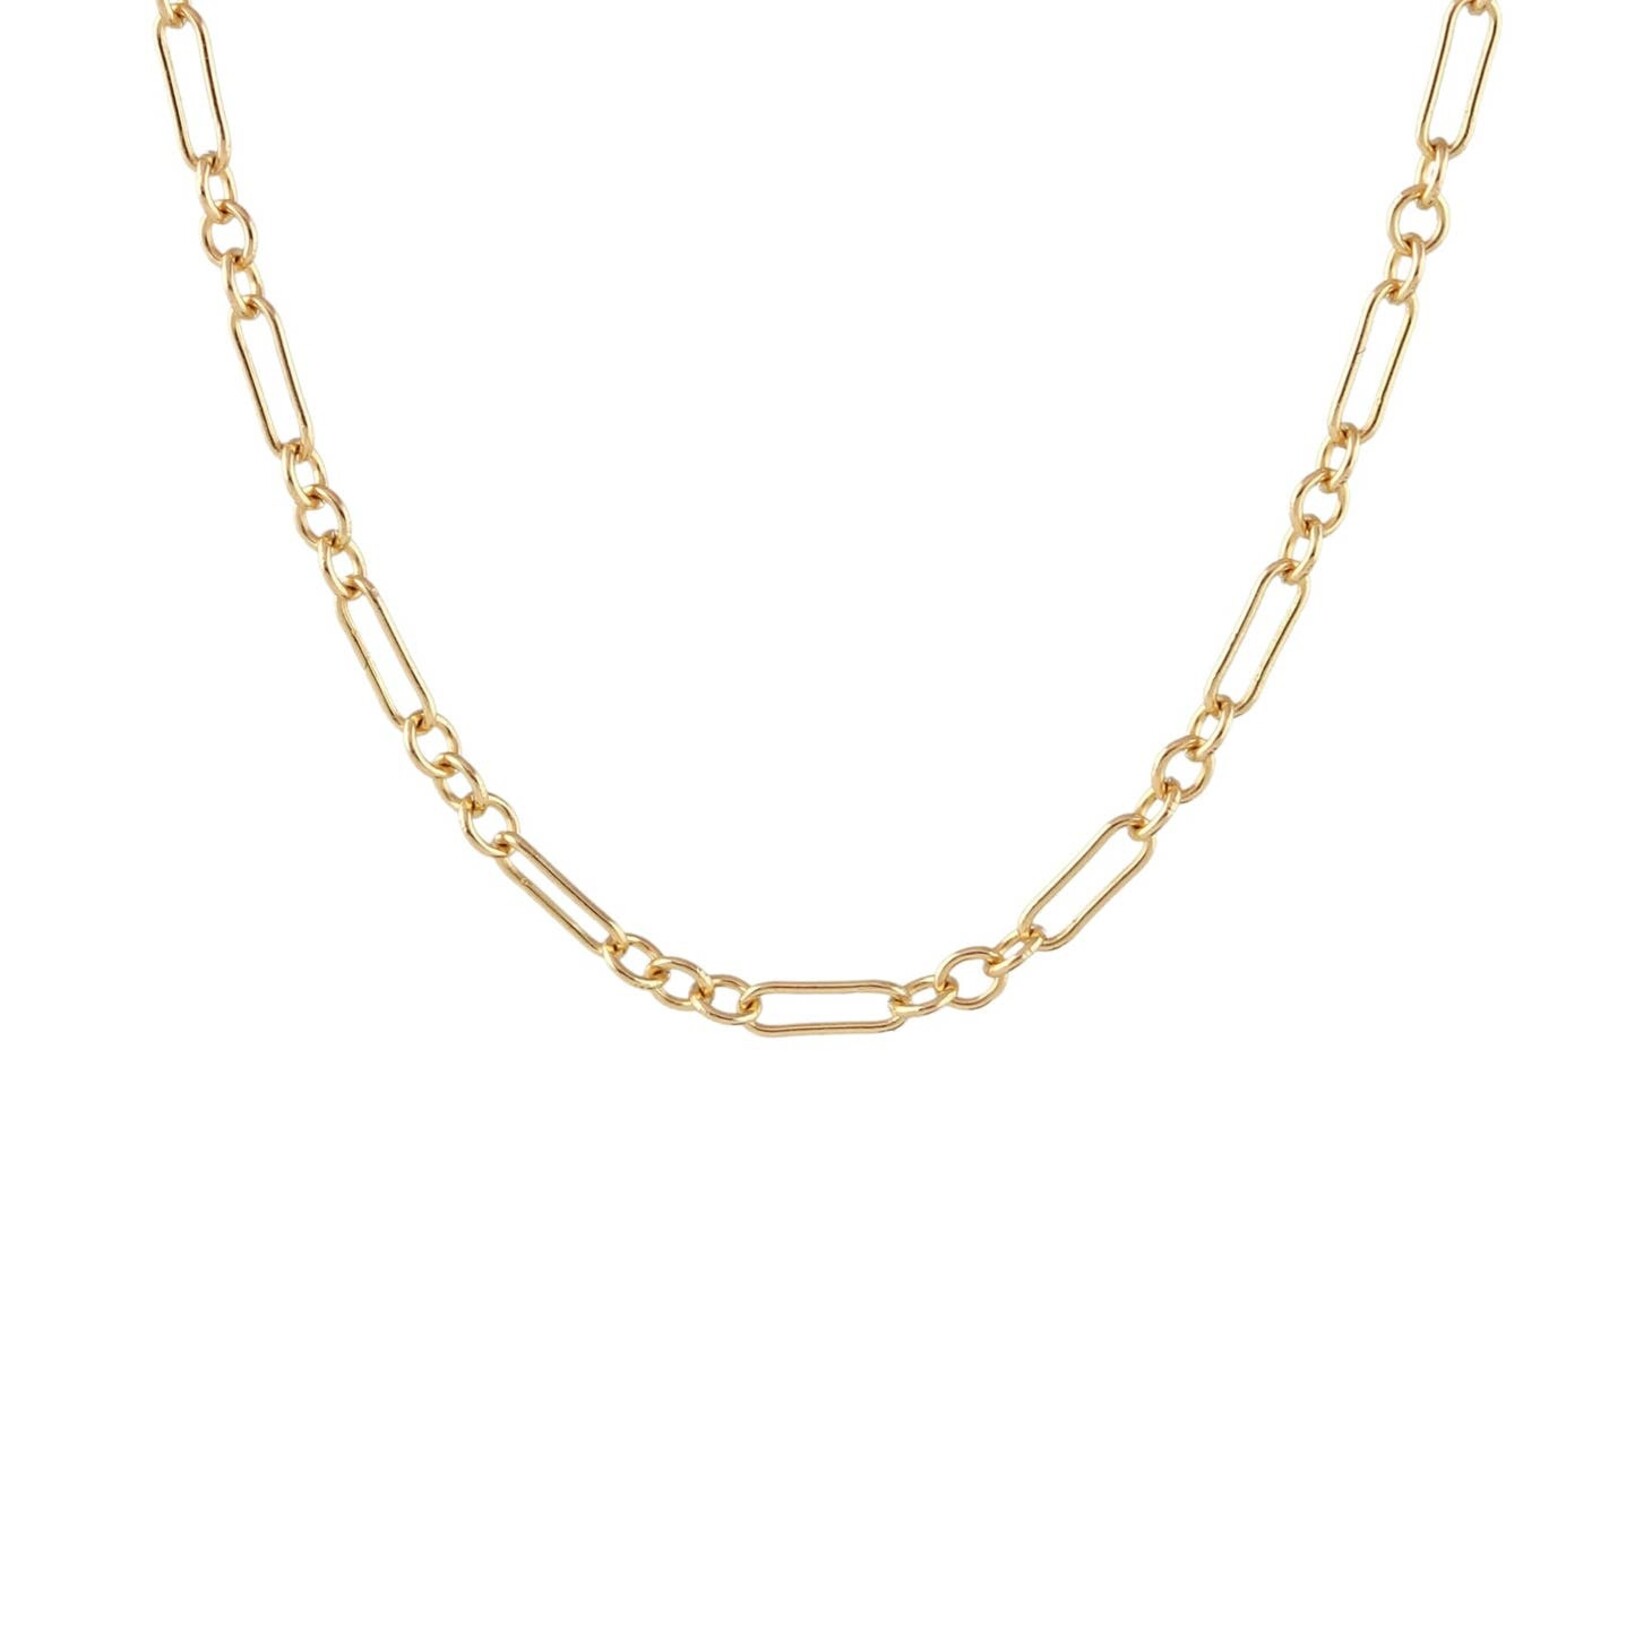 Kris Nations Long and Short Chain Necklace